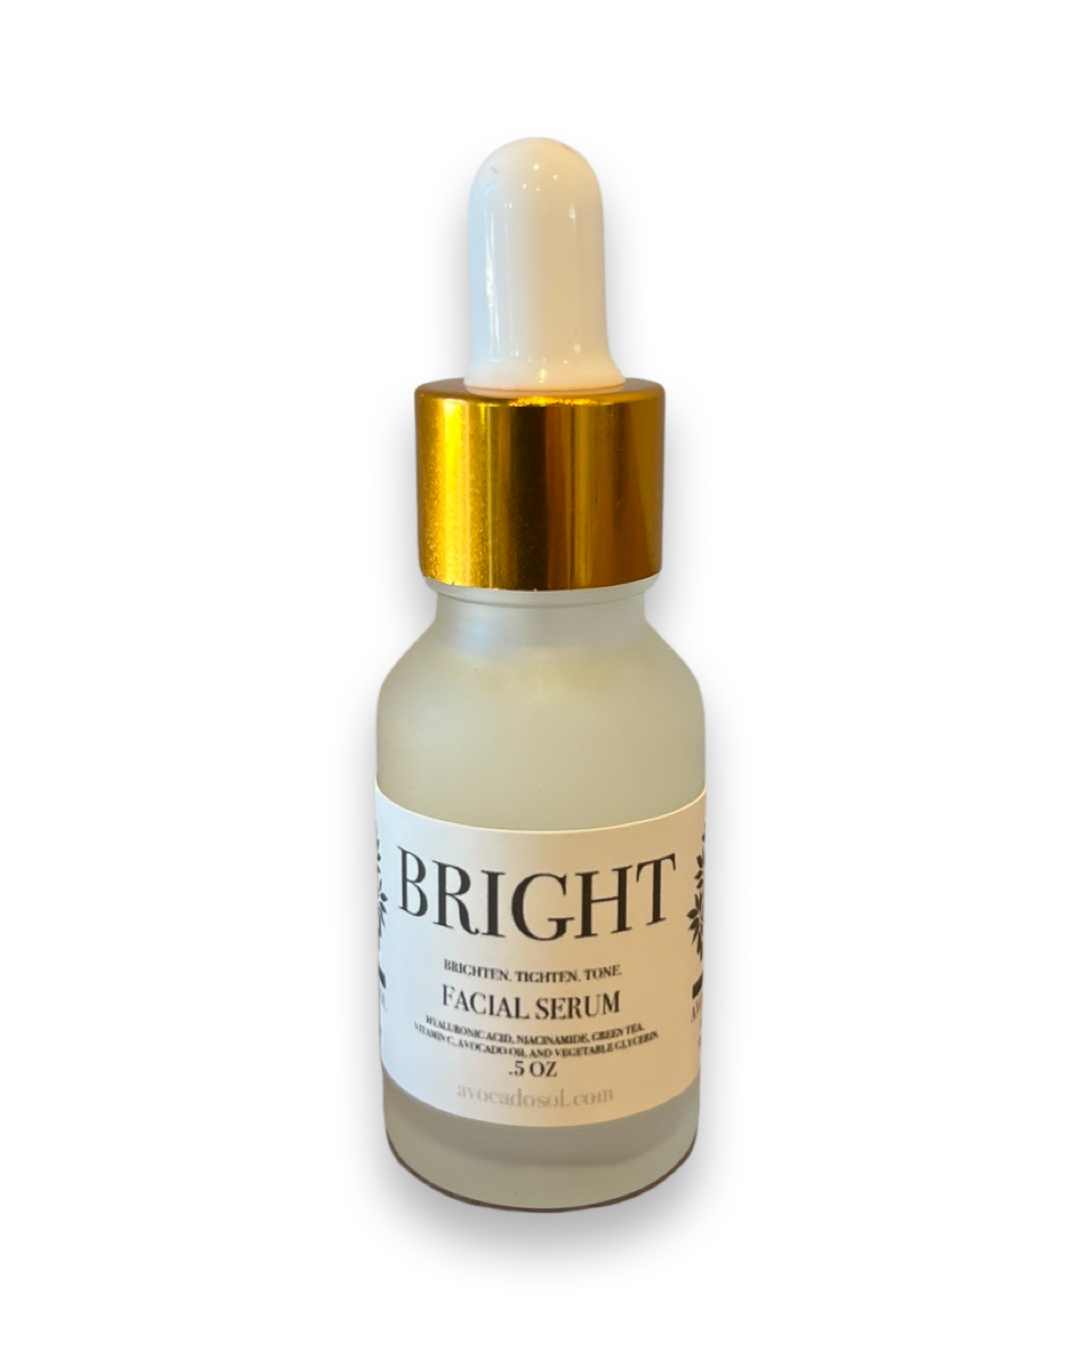  Skin care, facial serum, brightener, facial brightener, facial, serum, skin, face lotion, all natural serum, organic skin care, avocado skincare, avocado sol, avocado, serums, facial care, rejuvenating skin care, rejuvenate, anti aging, youth, less wrinkles, reduce fine lines, fine lines, age spots, wrinkles,